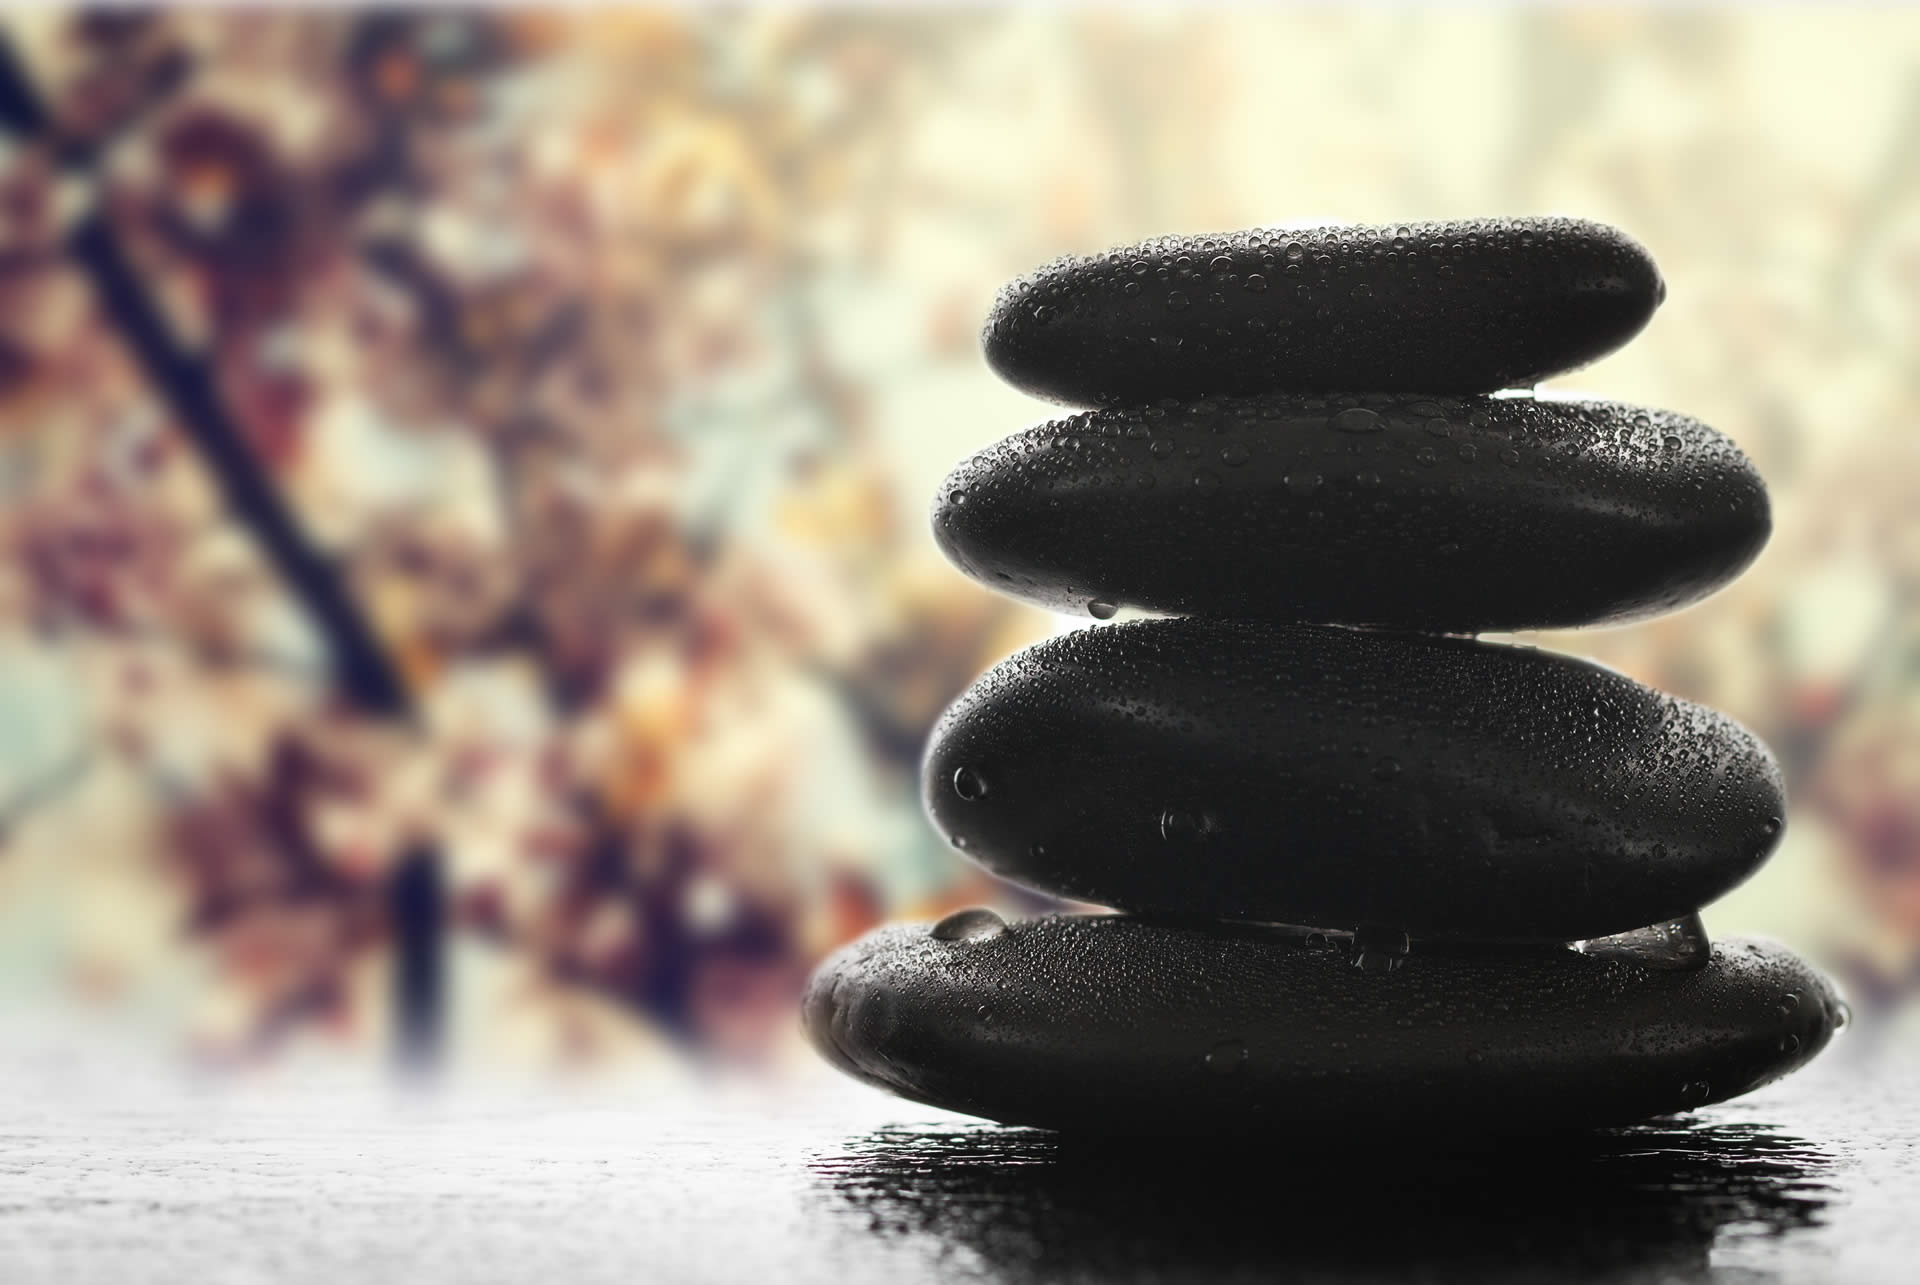 Hot Stone Massage: A Tool To Release Tension